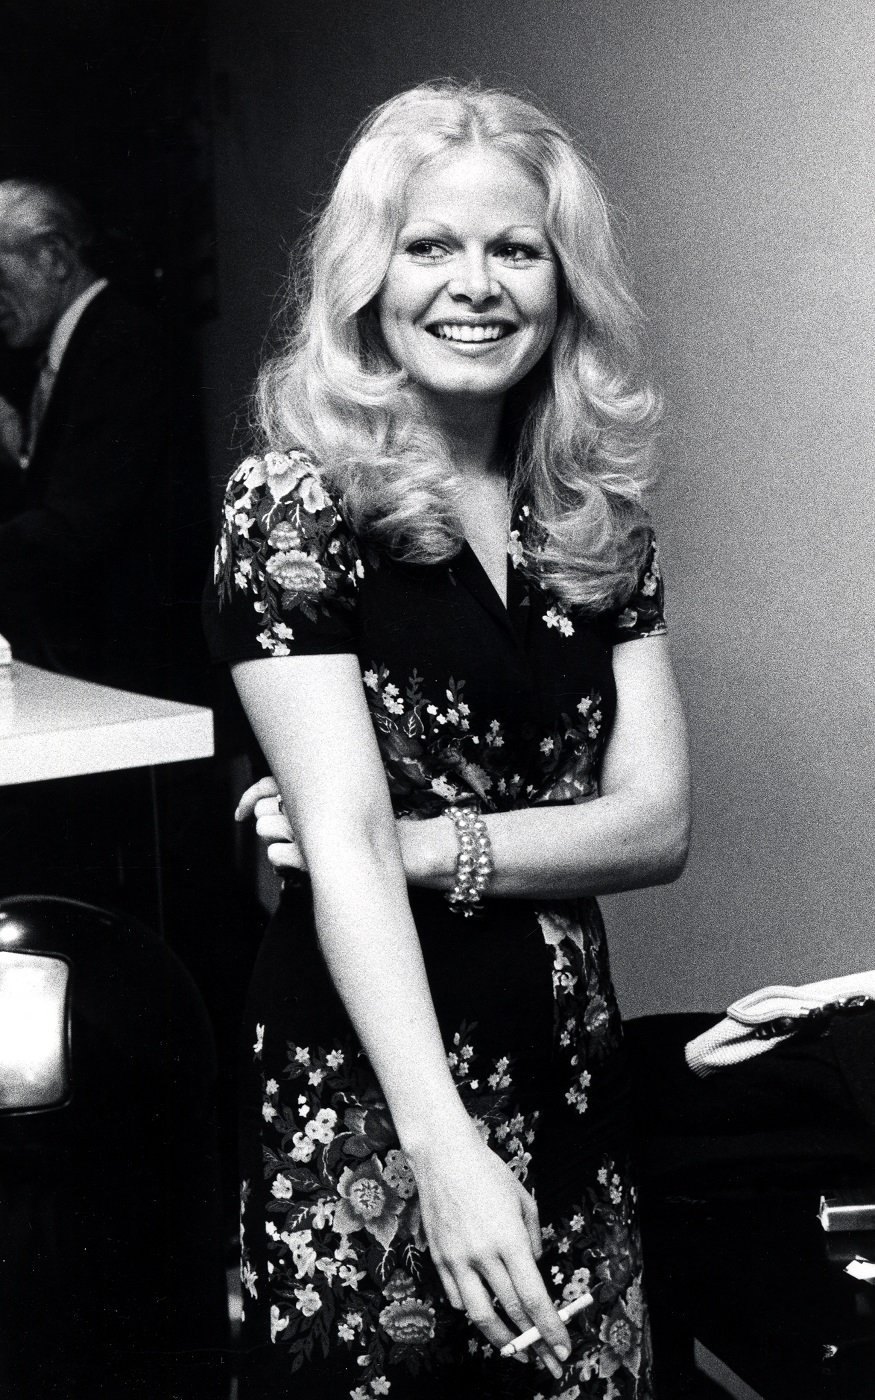 Sally Struthers during the opening night of 'Dude' on Broadway in 1972